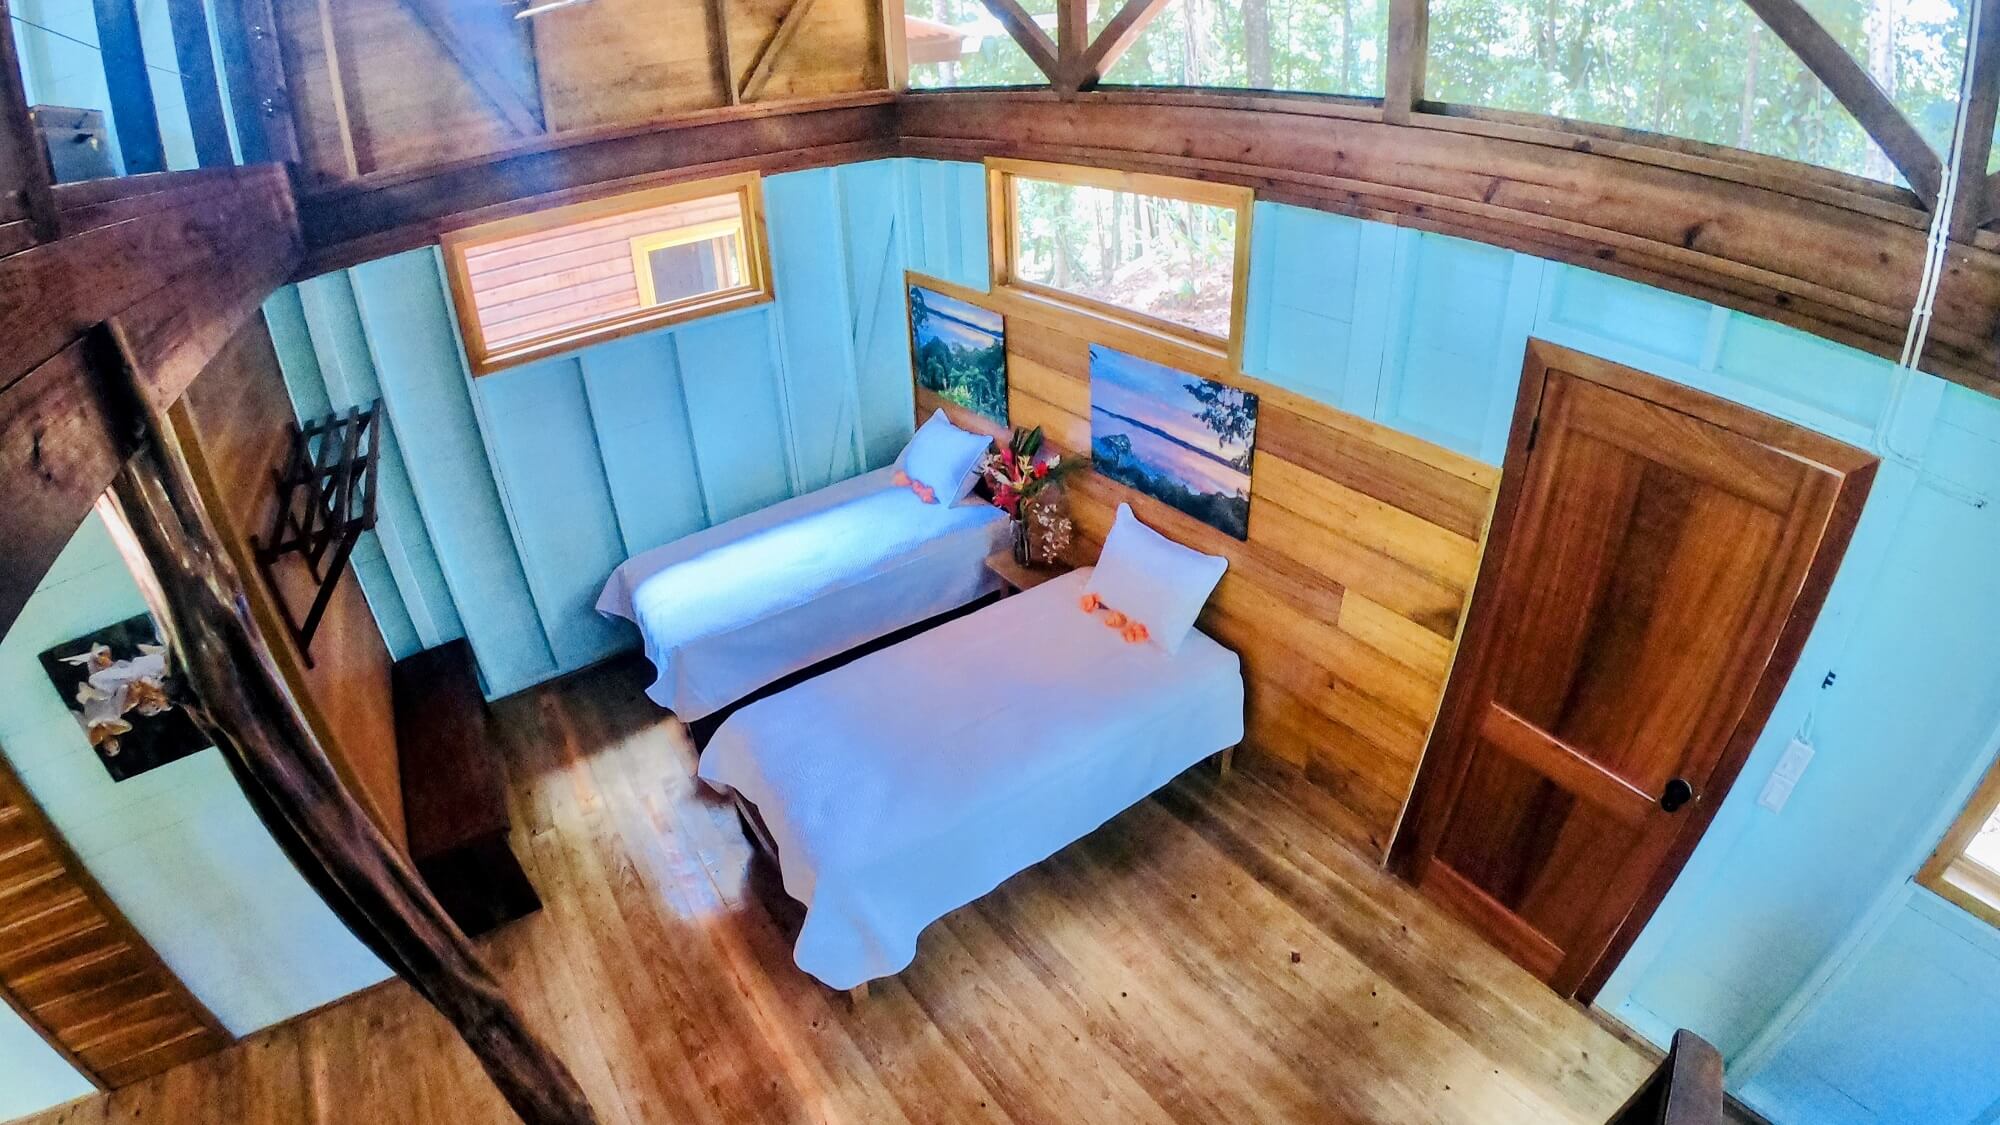 A room with two beds and wooden walls